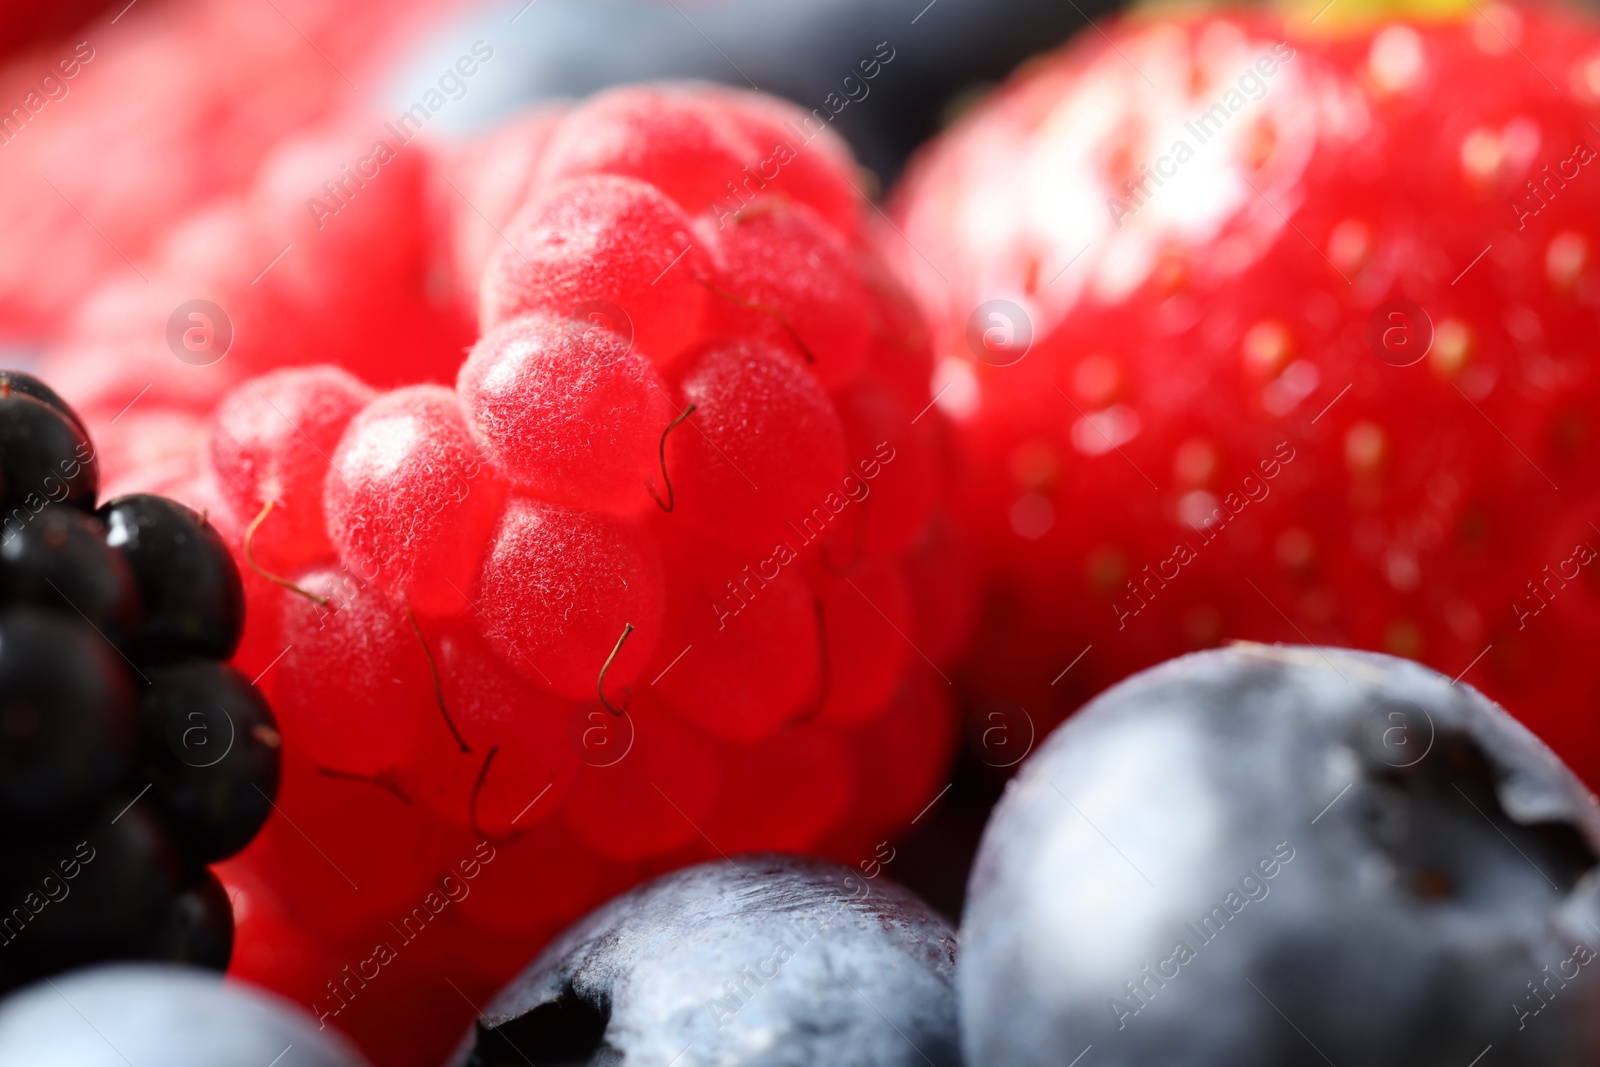 Photo of Different fresh ripe berries as background, macro view